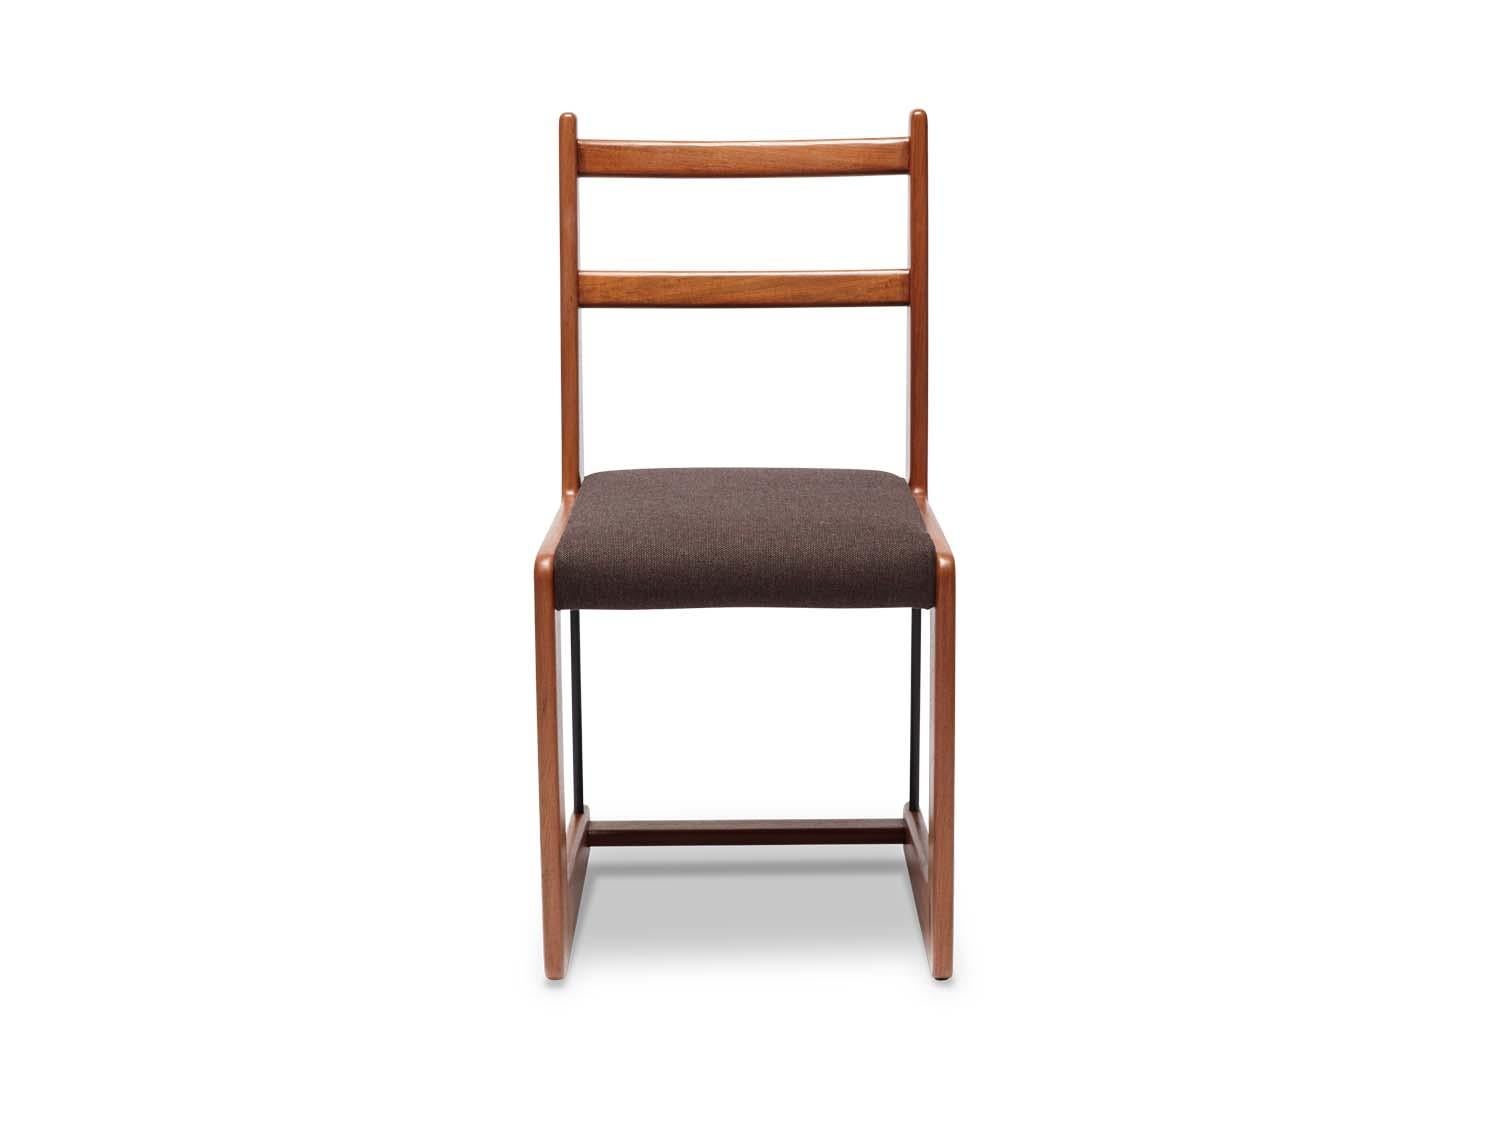 The outdoor version of the Cruz dining chair is made of solid teak featuring a cantilevered shape and matte black powder coated stretchers. The seat is upholstered.

Inspired by the bold scale and linear detailing of early 20th Century California